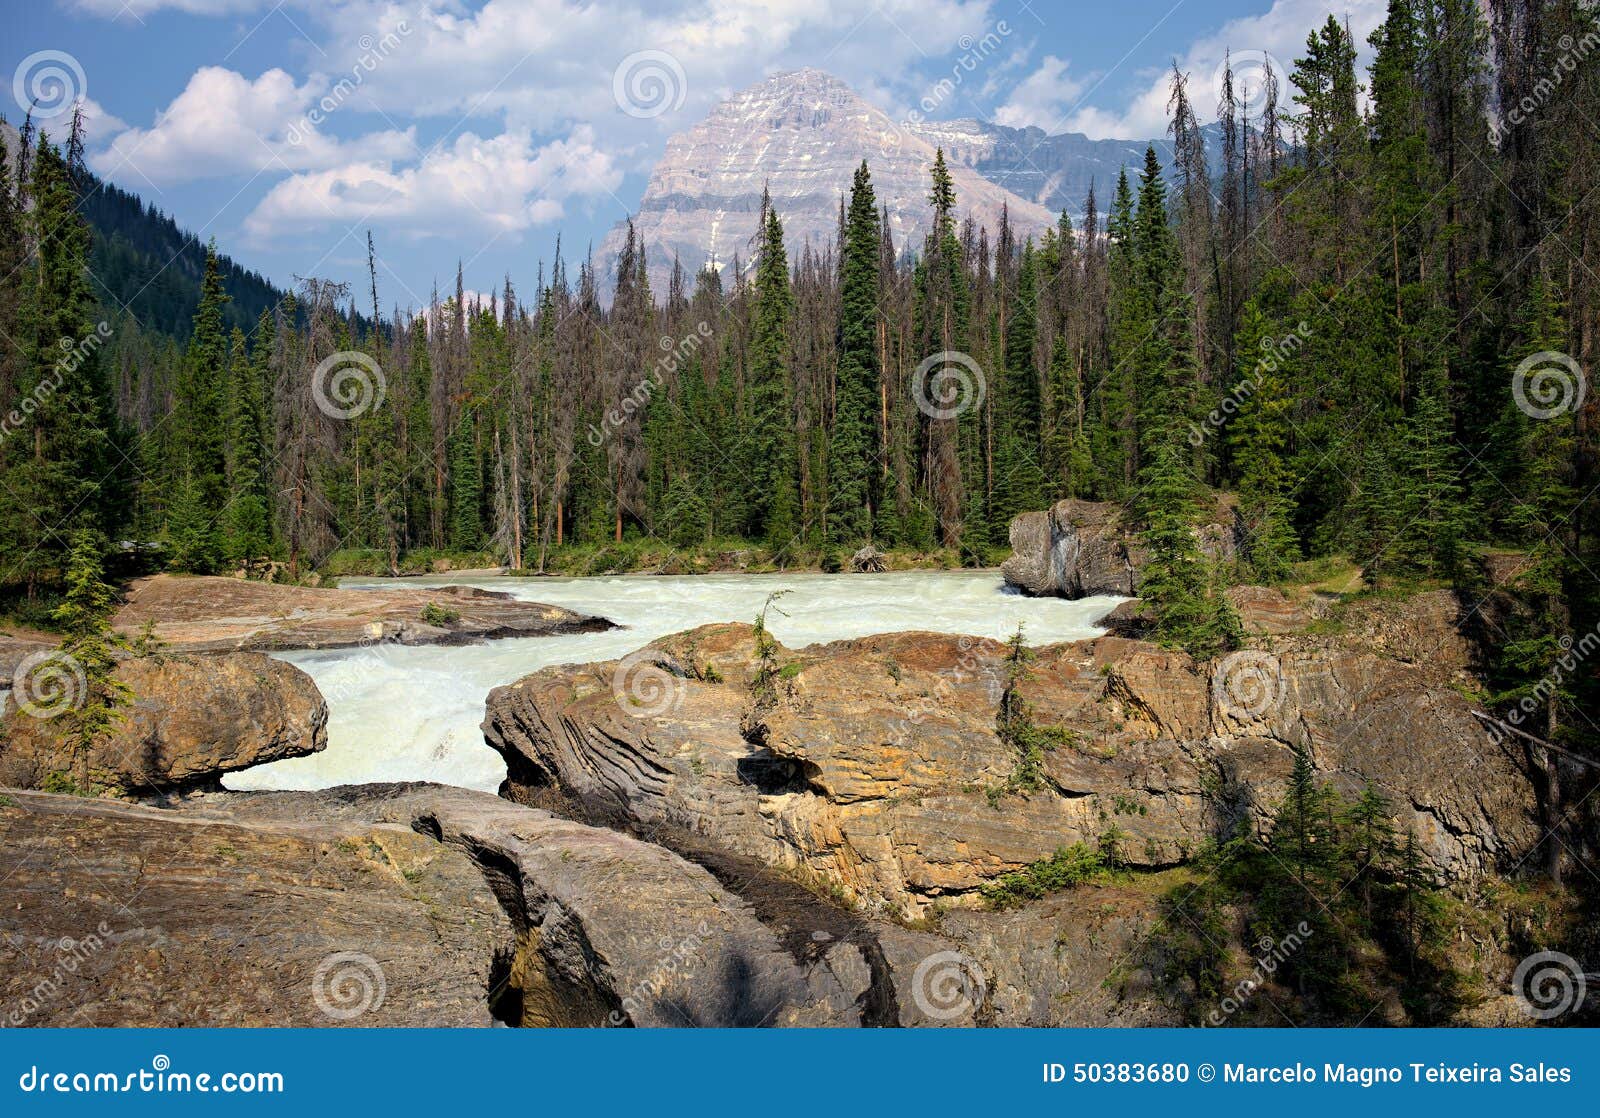 the kicking horse river with mt. stephen in the background, yoho national park, british columbia, canada